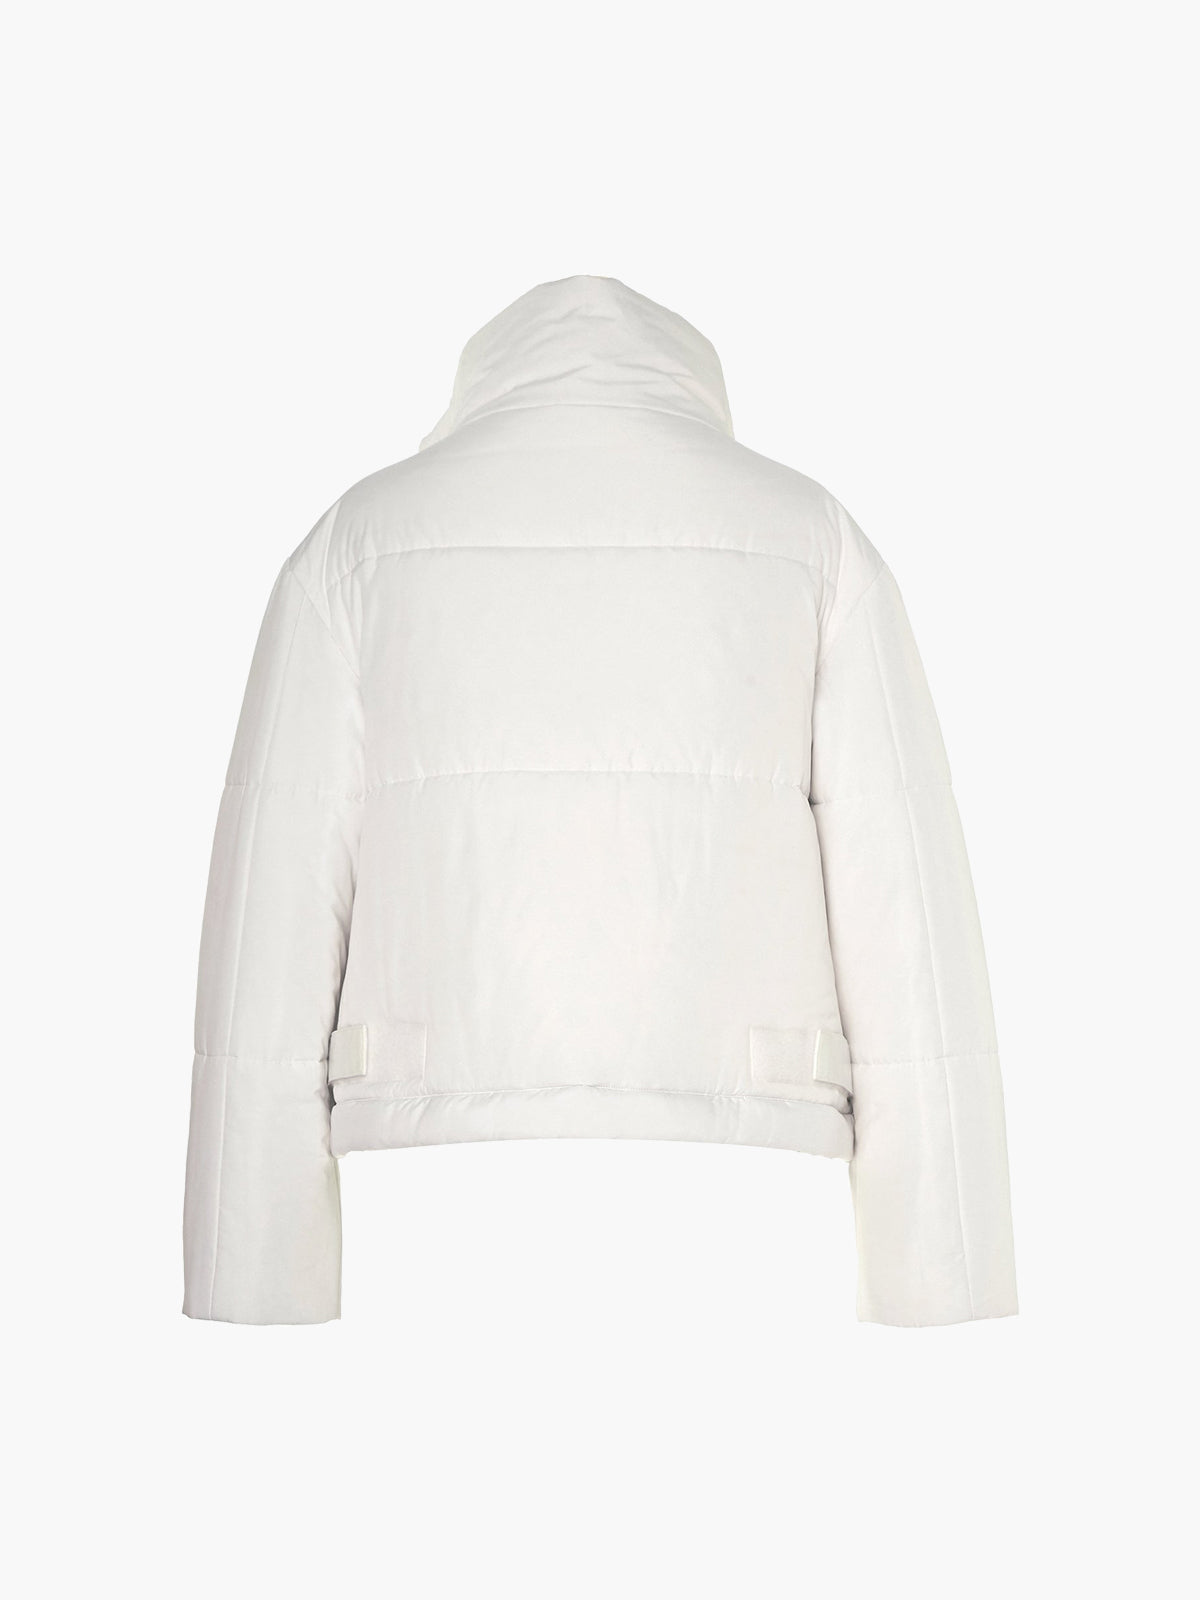 Reversible Cropped Sustainable Down Coat | White/Citron Reversible Cropped Sustainable Down Coat | White/Citron